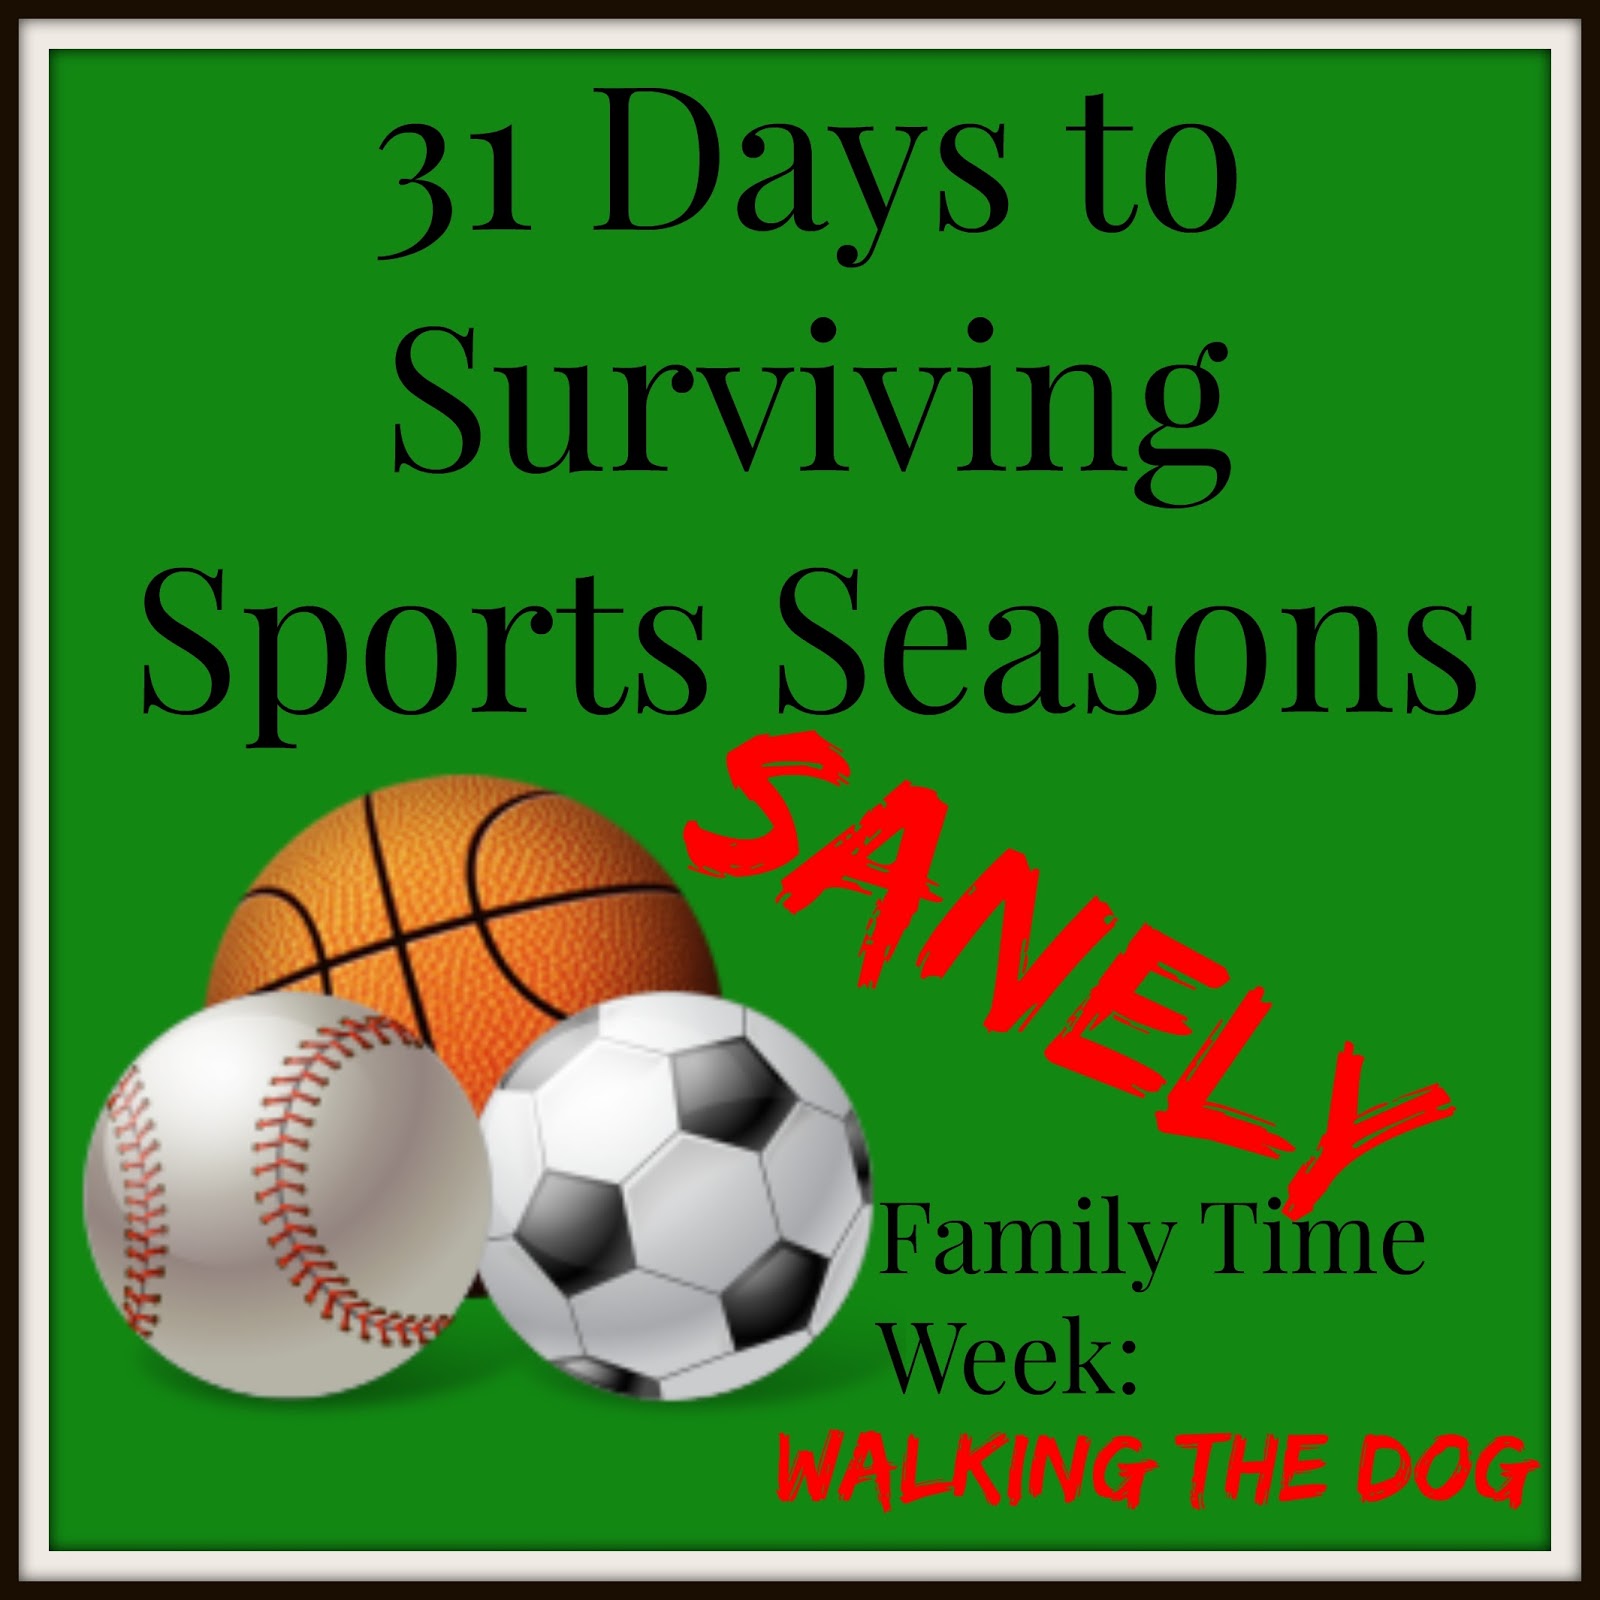 31 Days to Surviving Sports Seasons Sanely: Walking the Dog